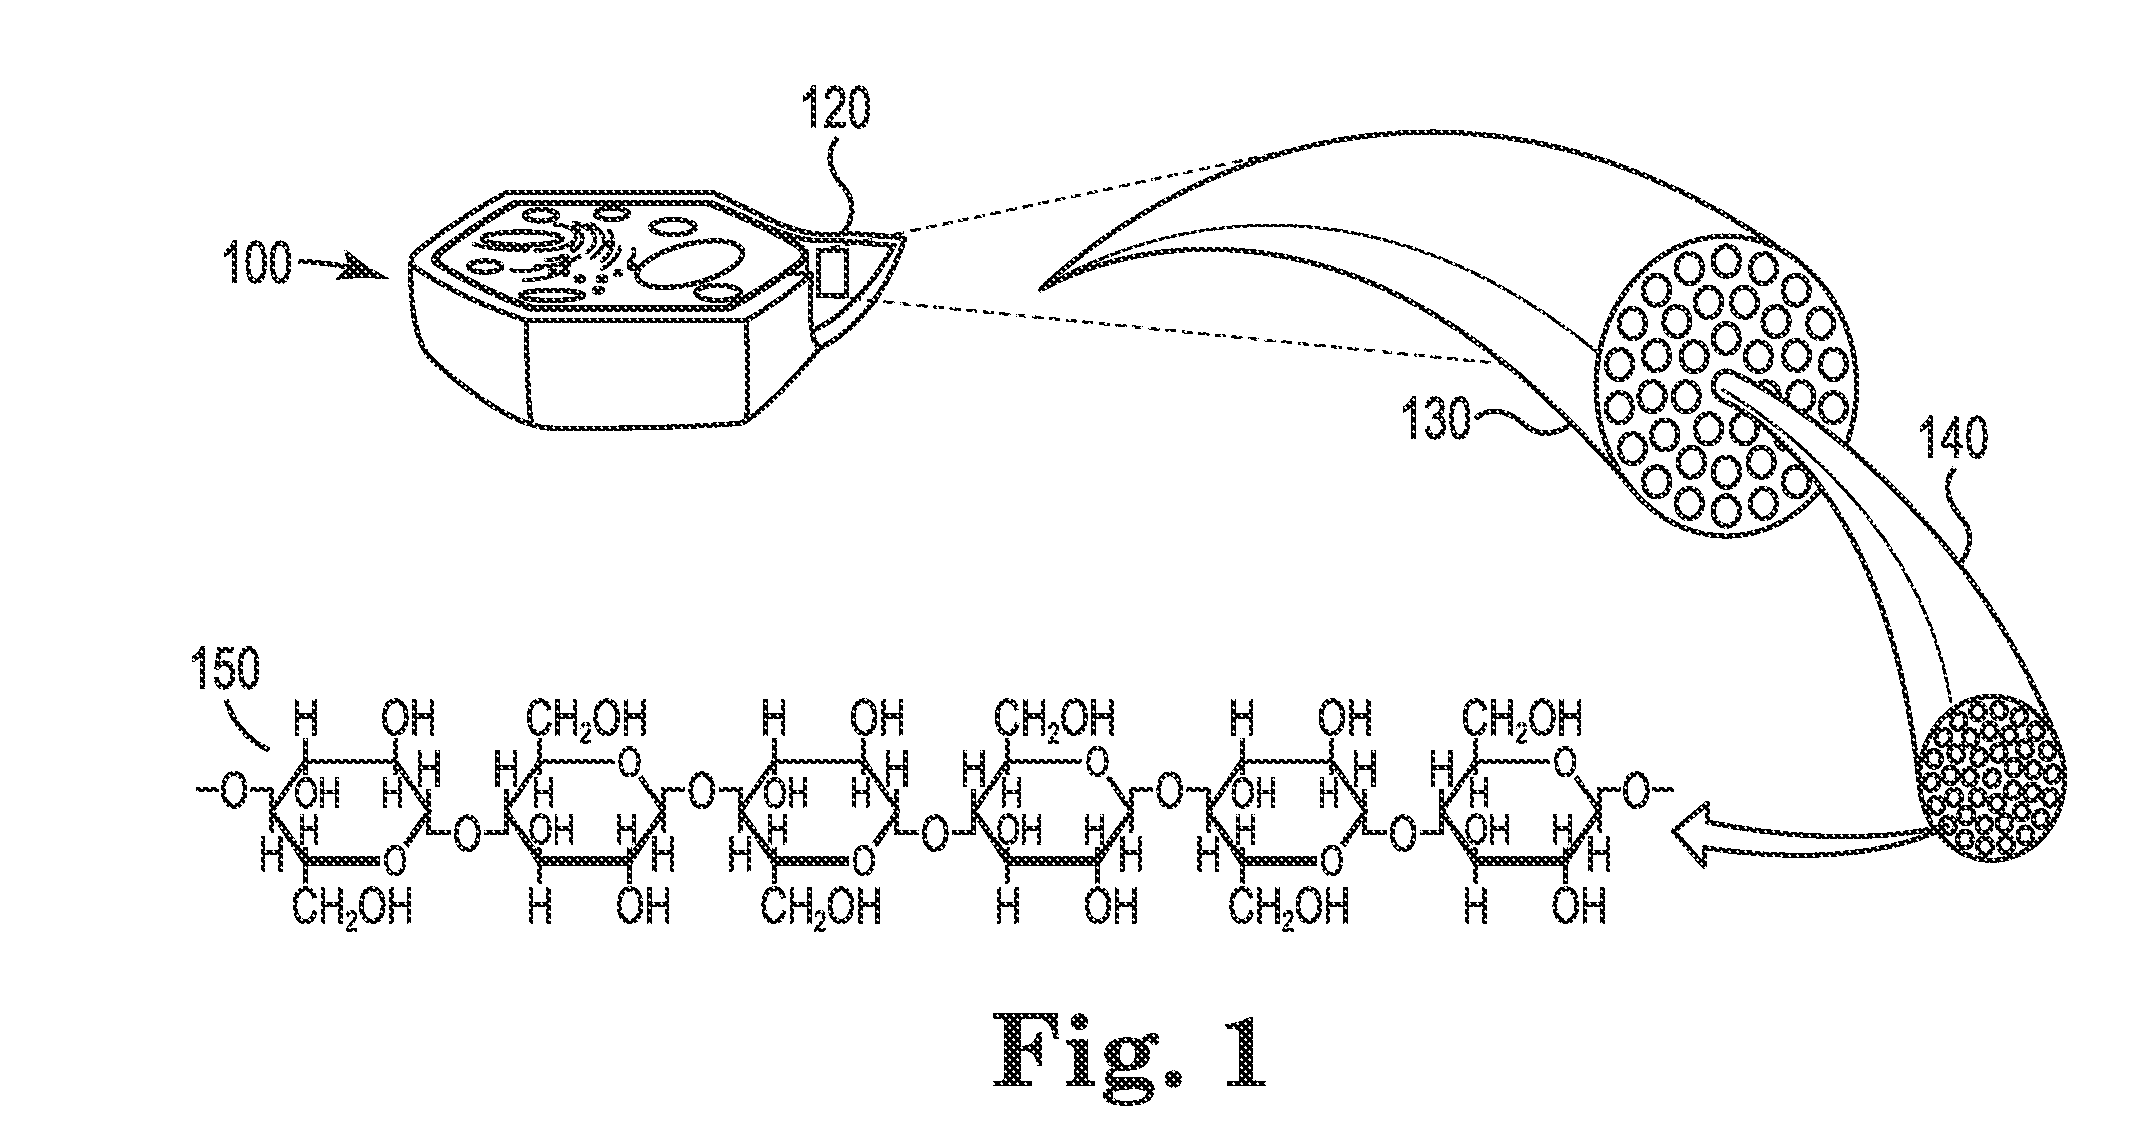 System of Using a Reaction Chamber to Beneficiate Organic-Carbon-Containing Feedstock for Downstream Processes